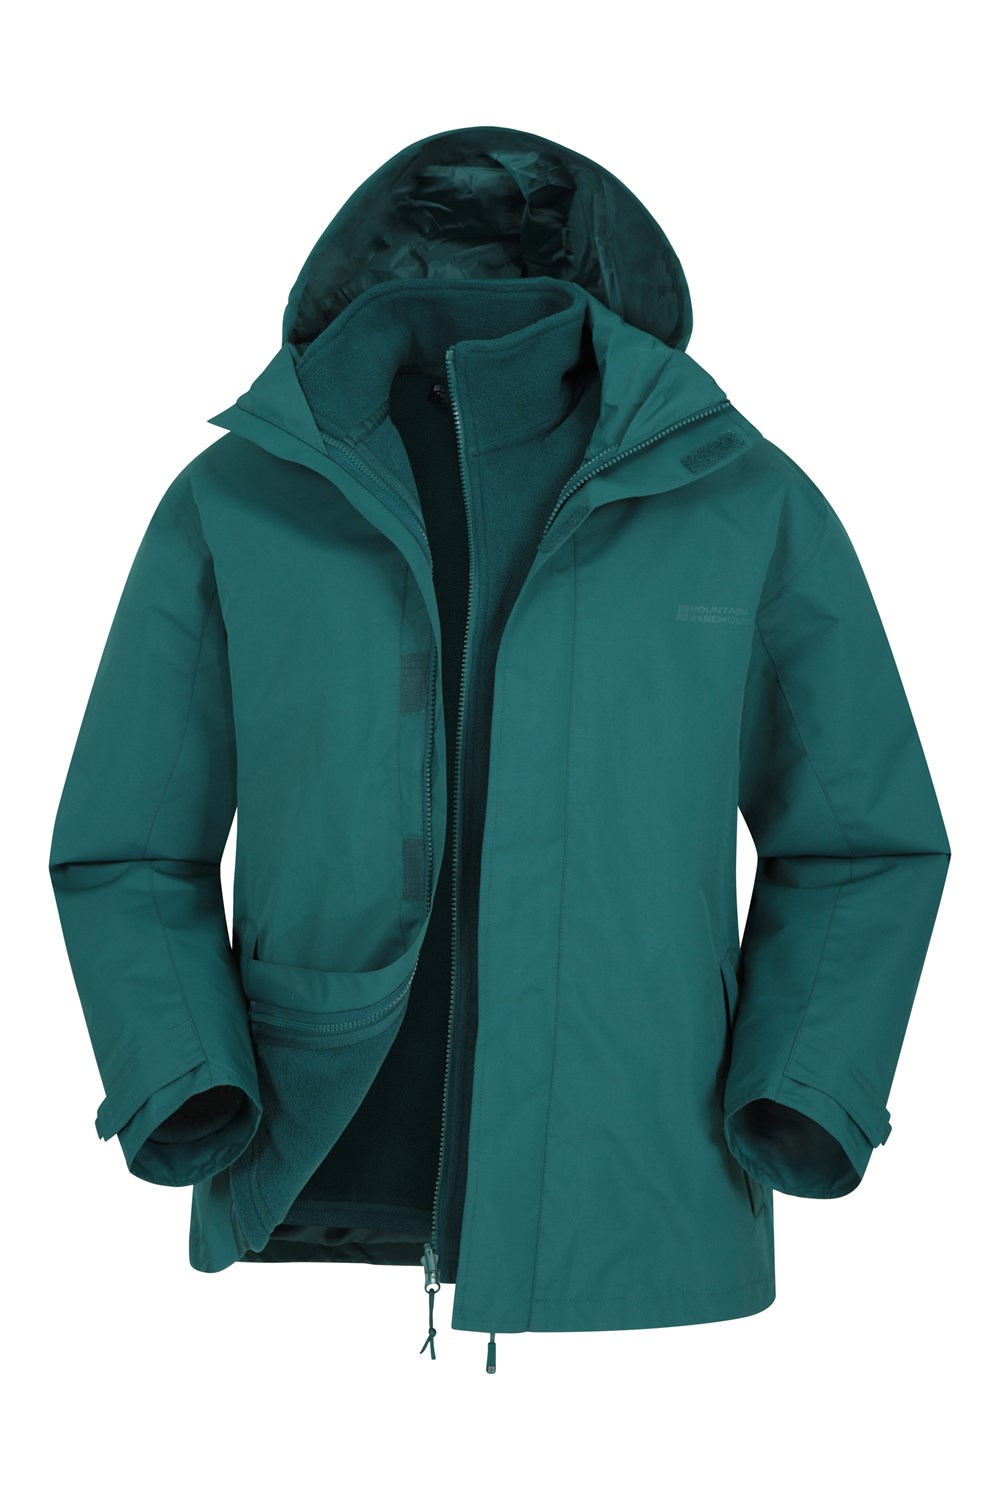 miniature 21 - Mountain Warehouse Mens 3 in 1 Water Resistant Jacket Triclimate Winter Coat